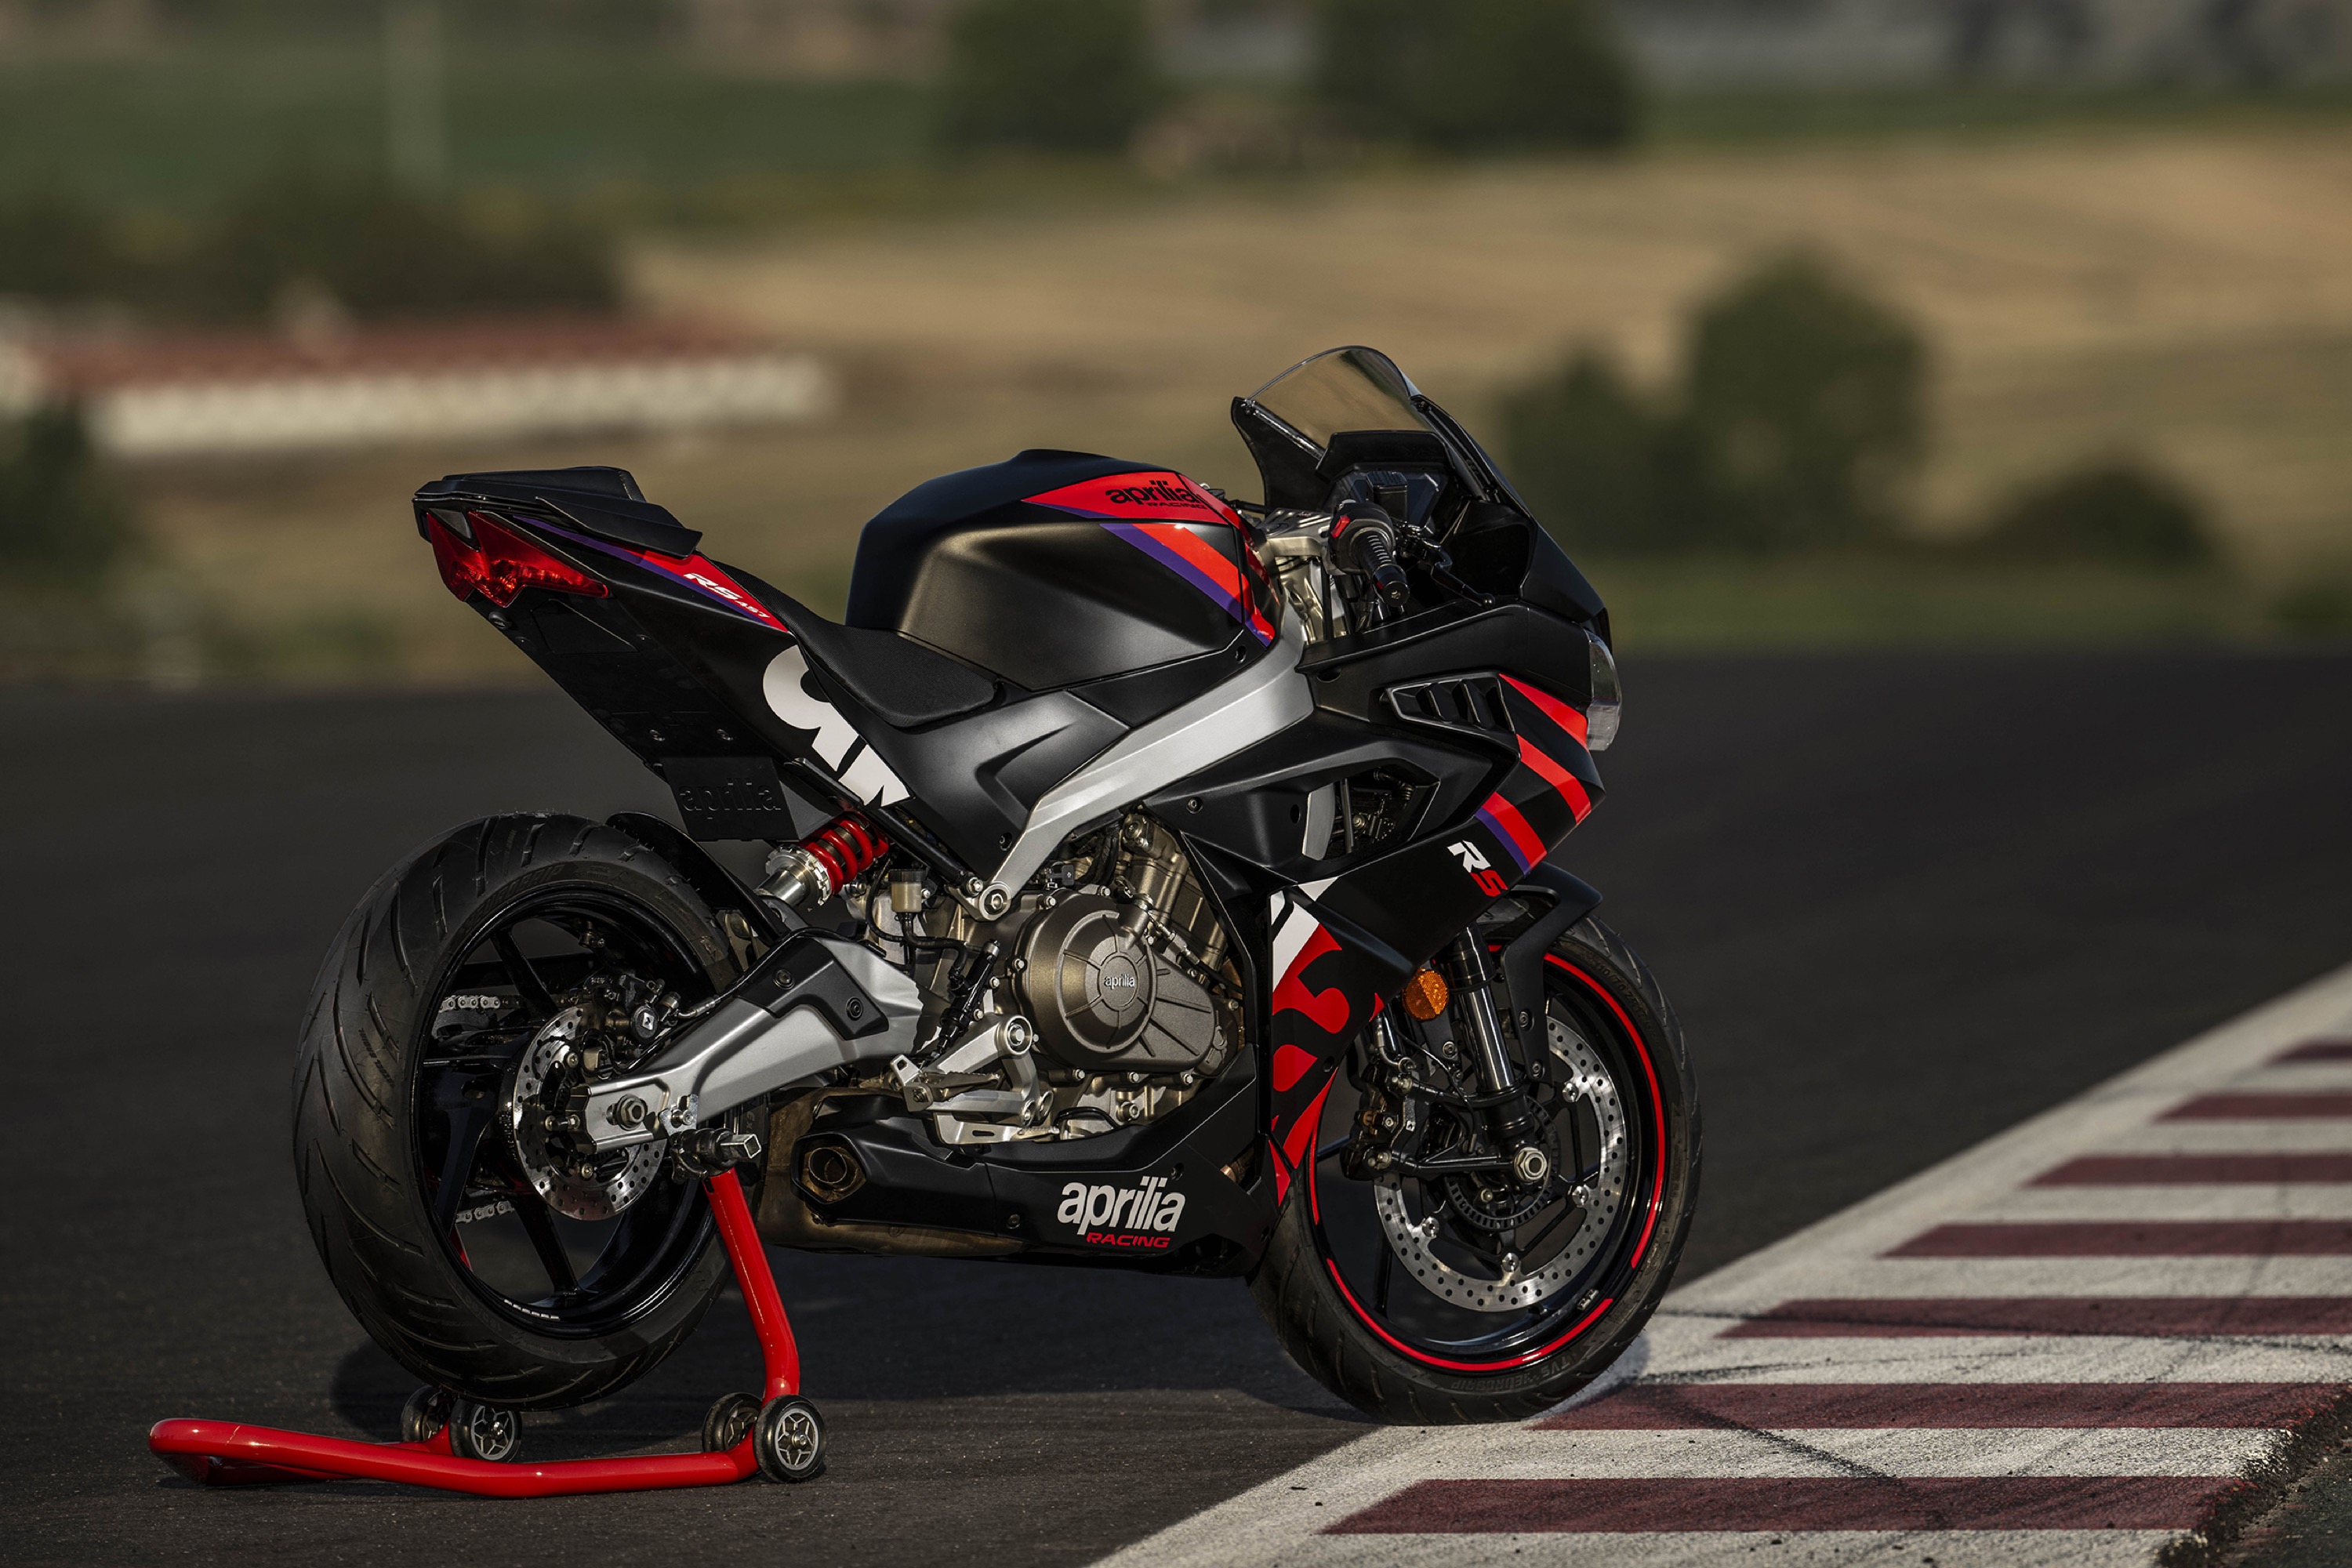 The Aprilia RS 457 has a kerb weight of just 175 kg, which should make for an impressive power-to-weight ratio. The bike has been developed in Italy in collaboration with the teams in India